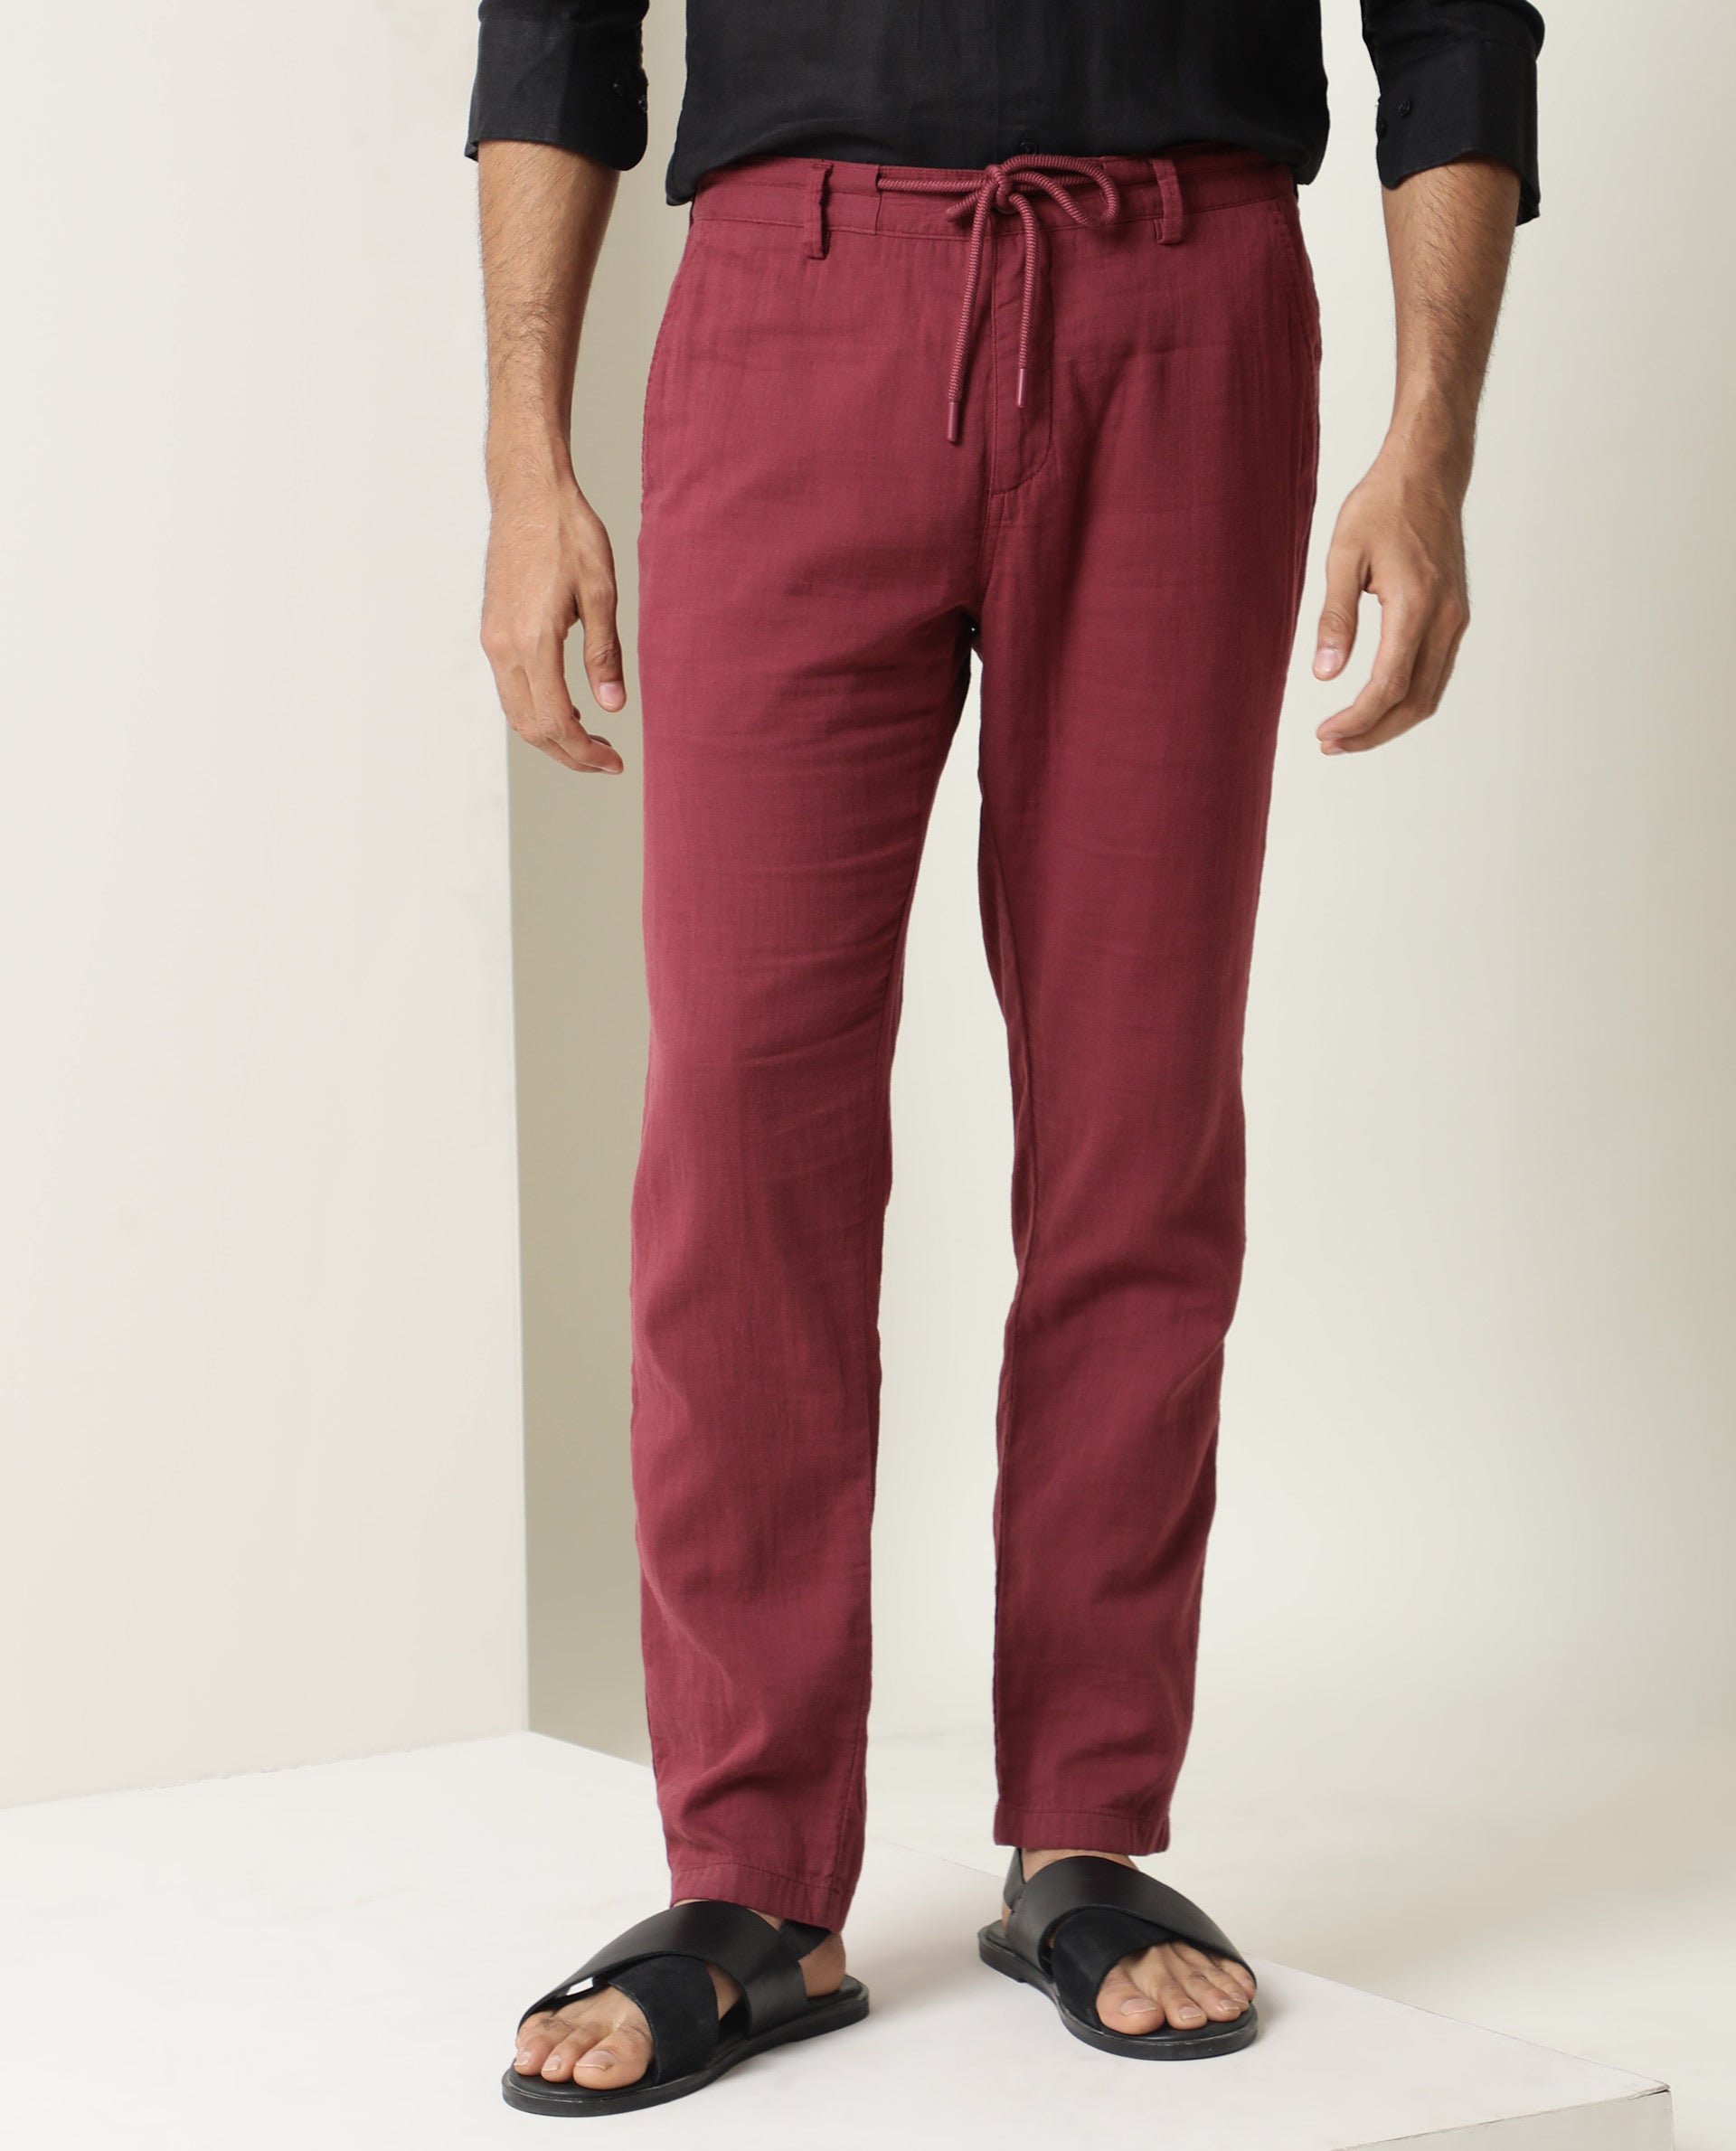 Buy Pastor Dark Red Men Pant Cotton for Best Price, Reviews, Free Shipping